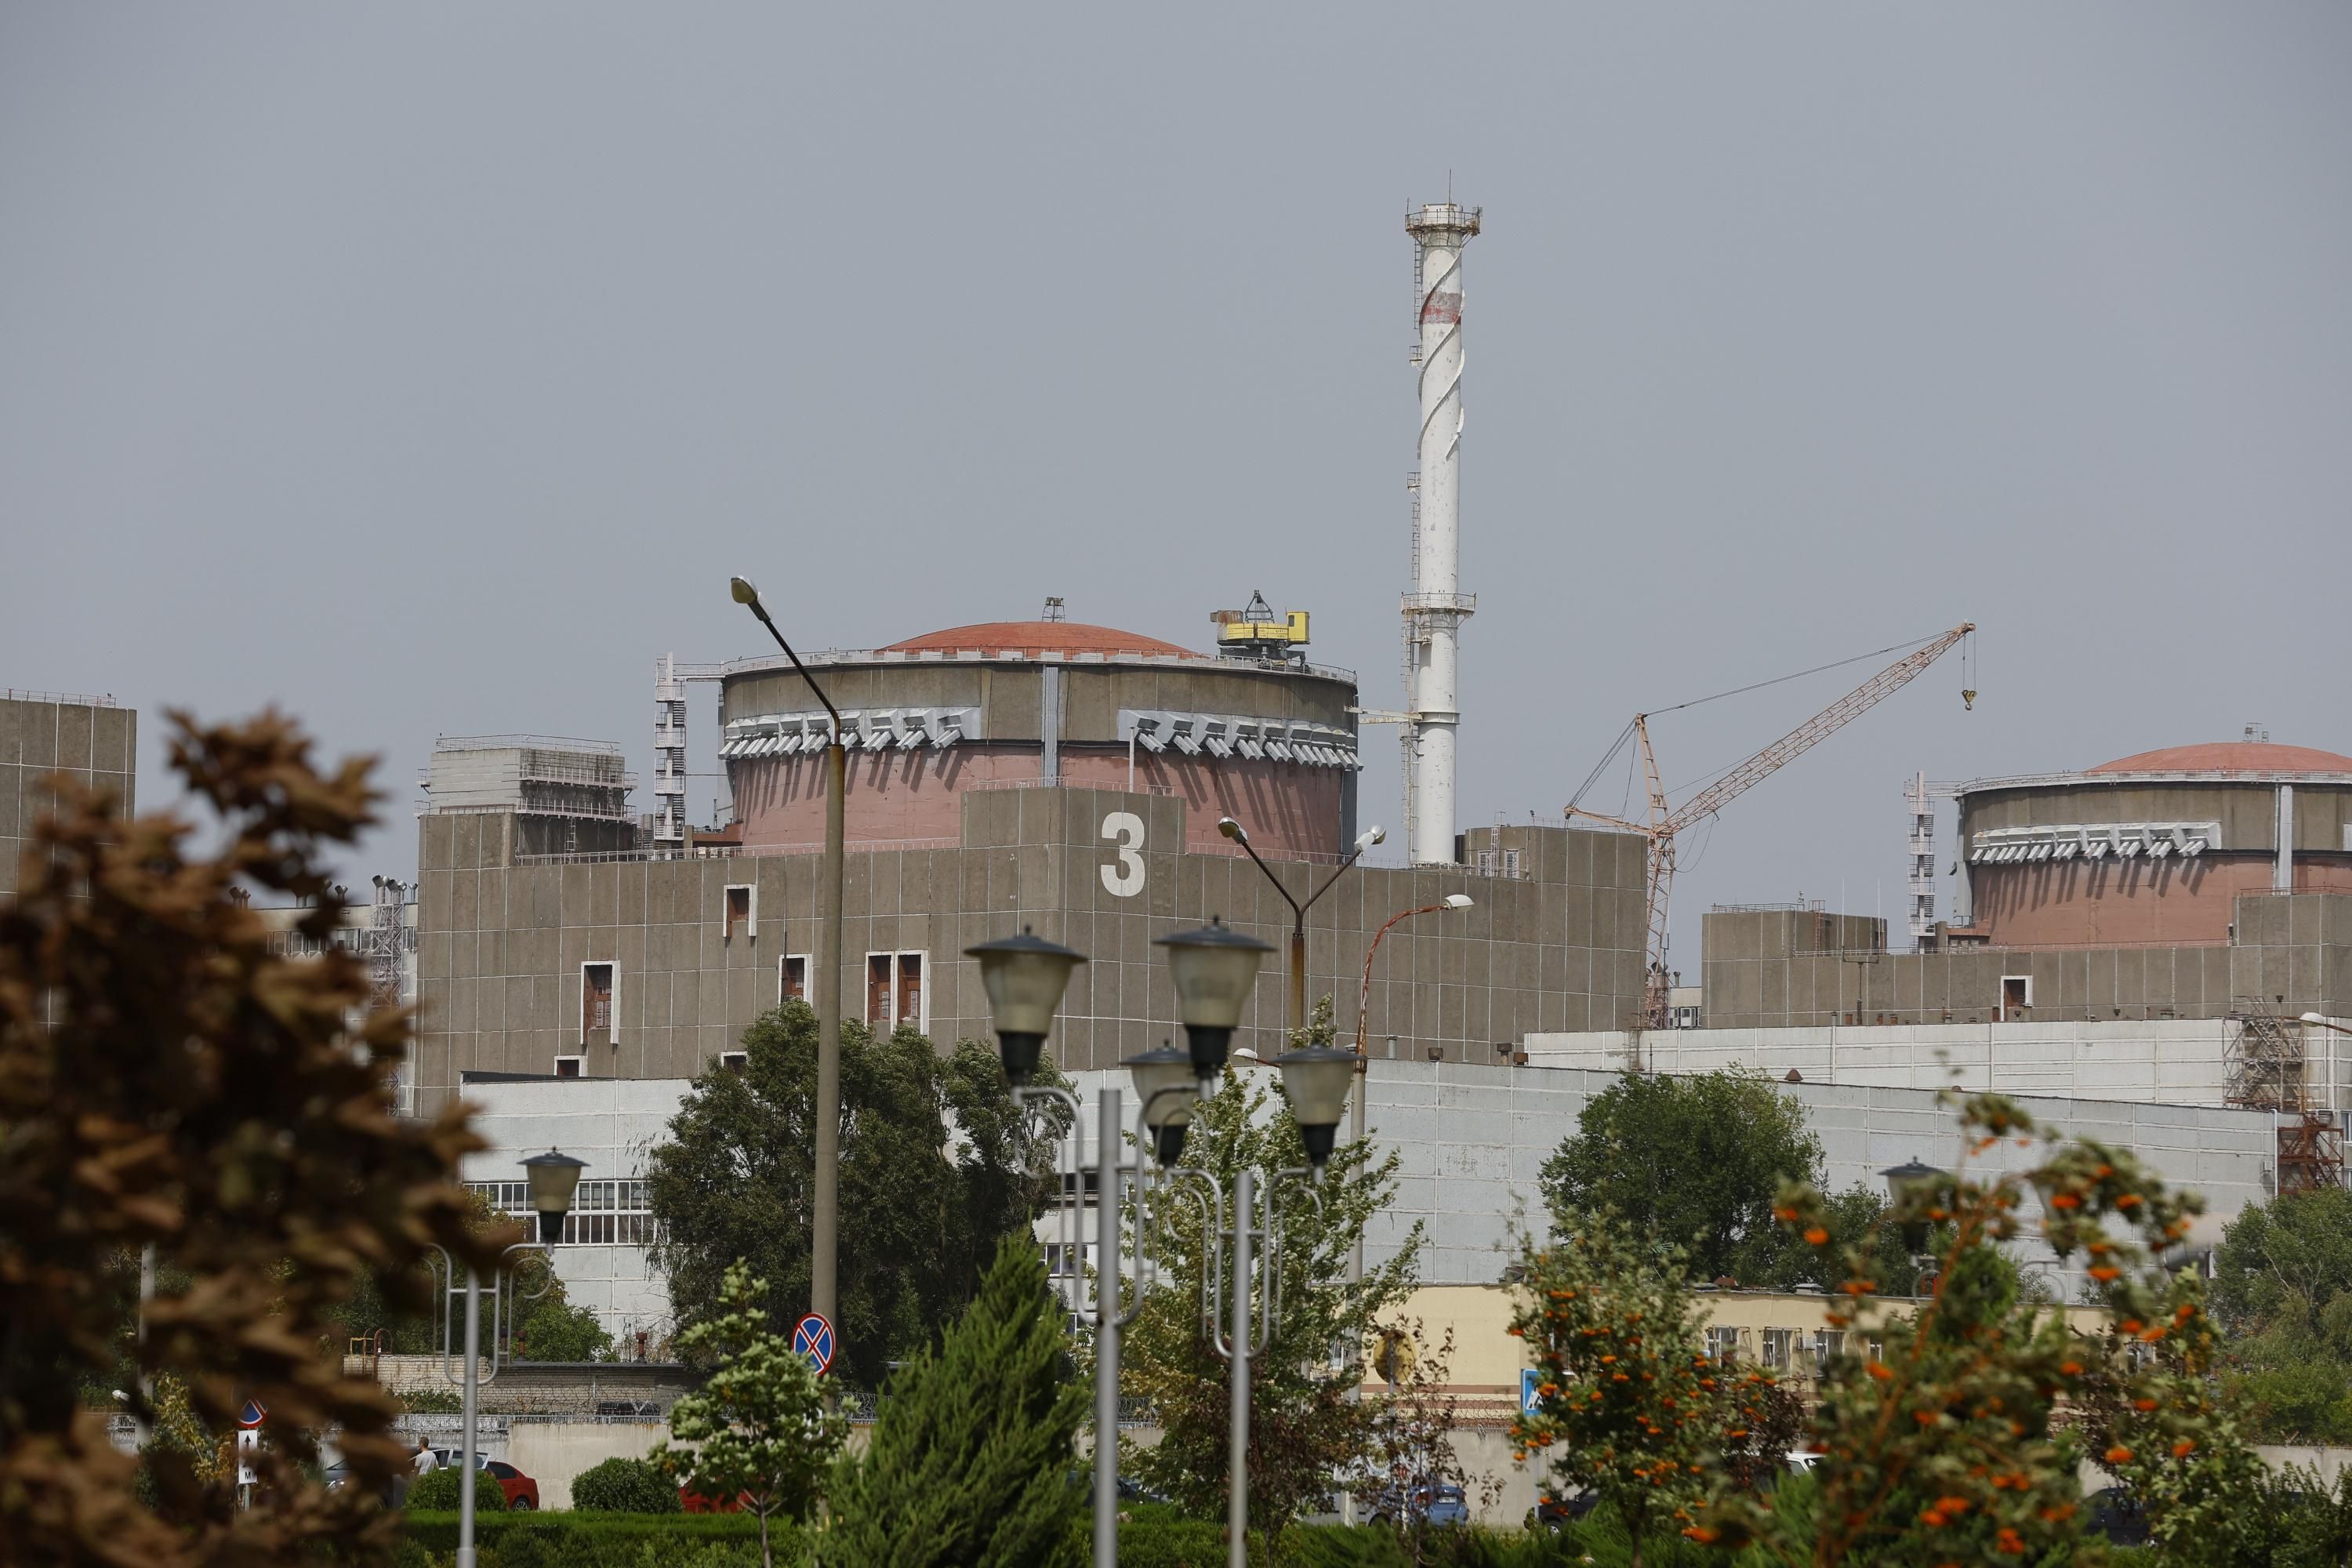 Ukrainian nuclear plant is pictured